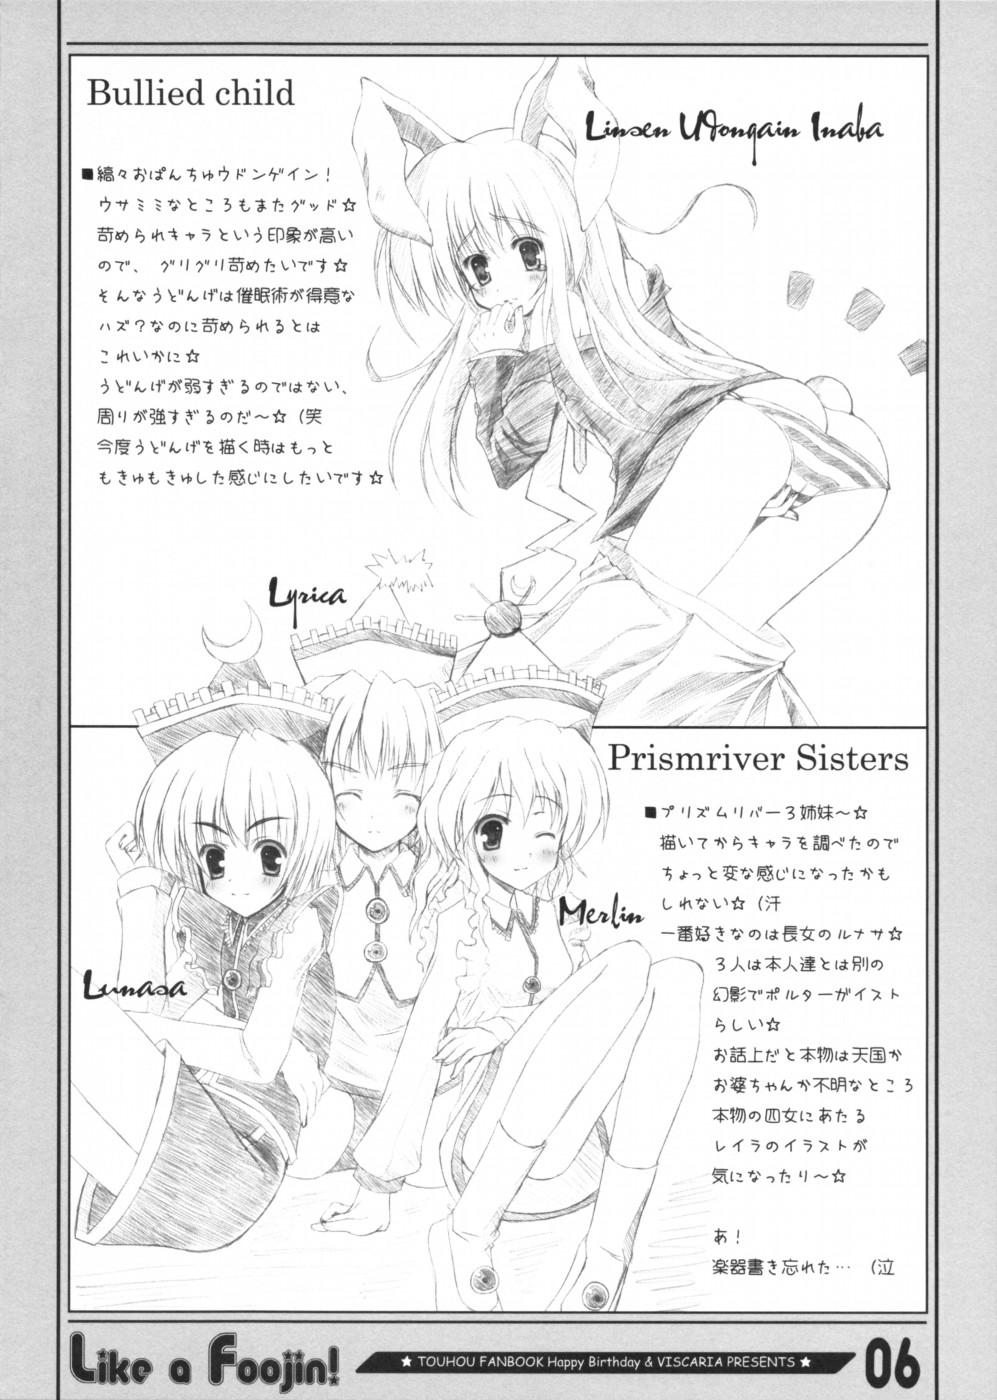 (Comic Memories 03) [HappyBirthday, VISCARIA (Atera, Maruchan.)] Like a Foojin! (Touhou Project) page 6 full